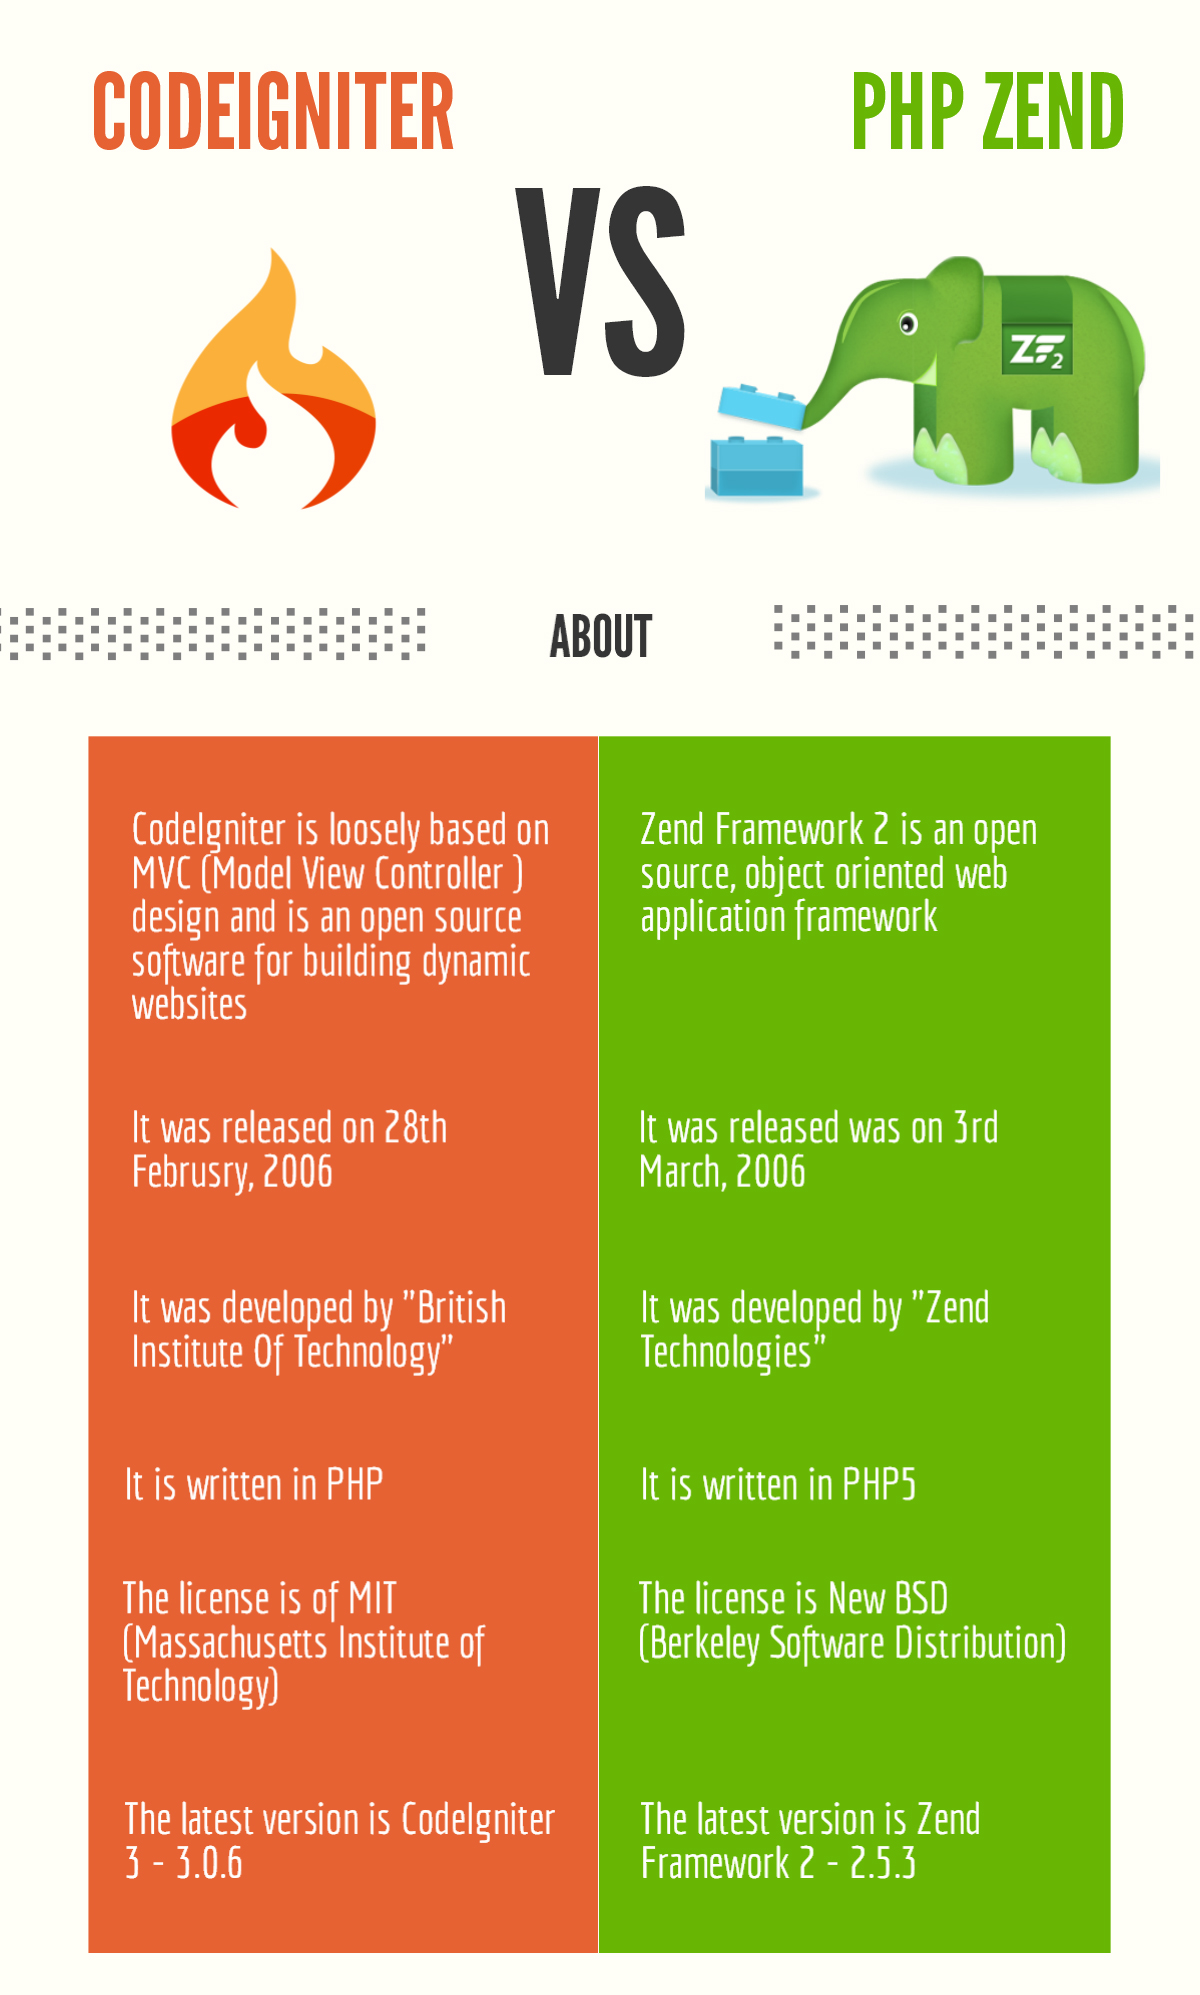 2 Best PHP Frameworks : CodeIgniter and PHP Zend